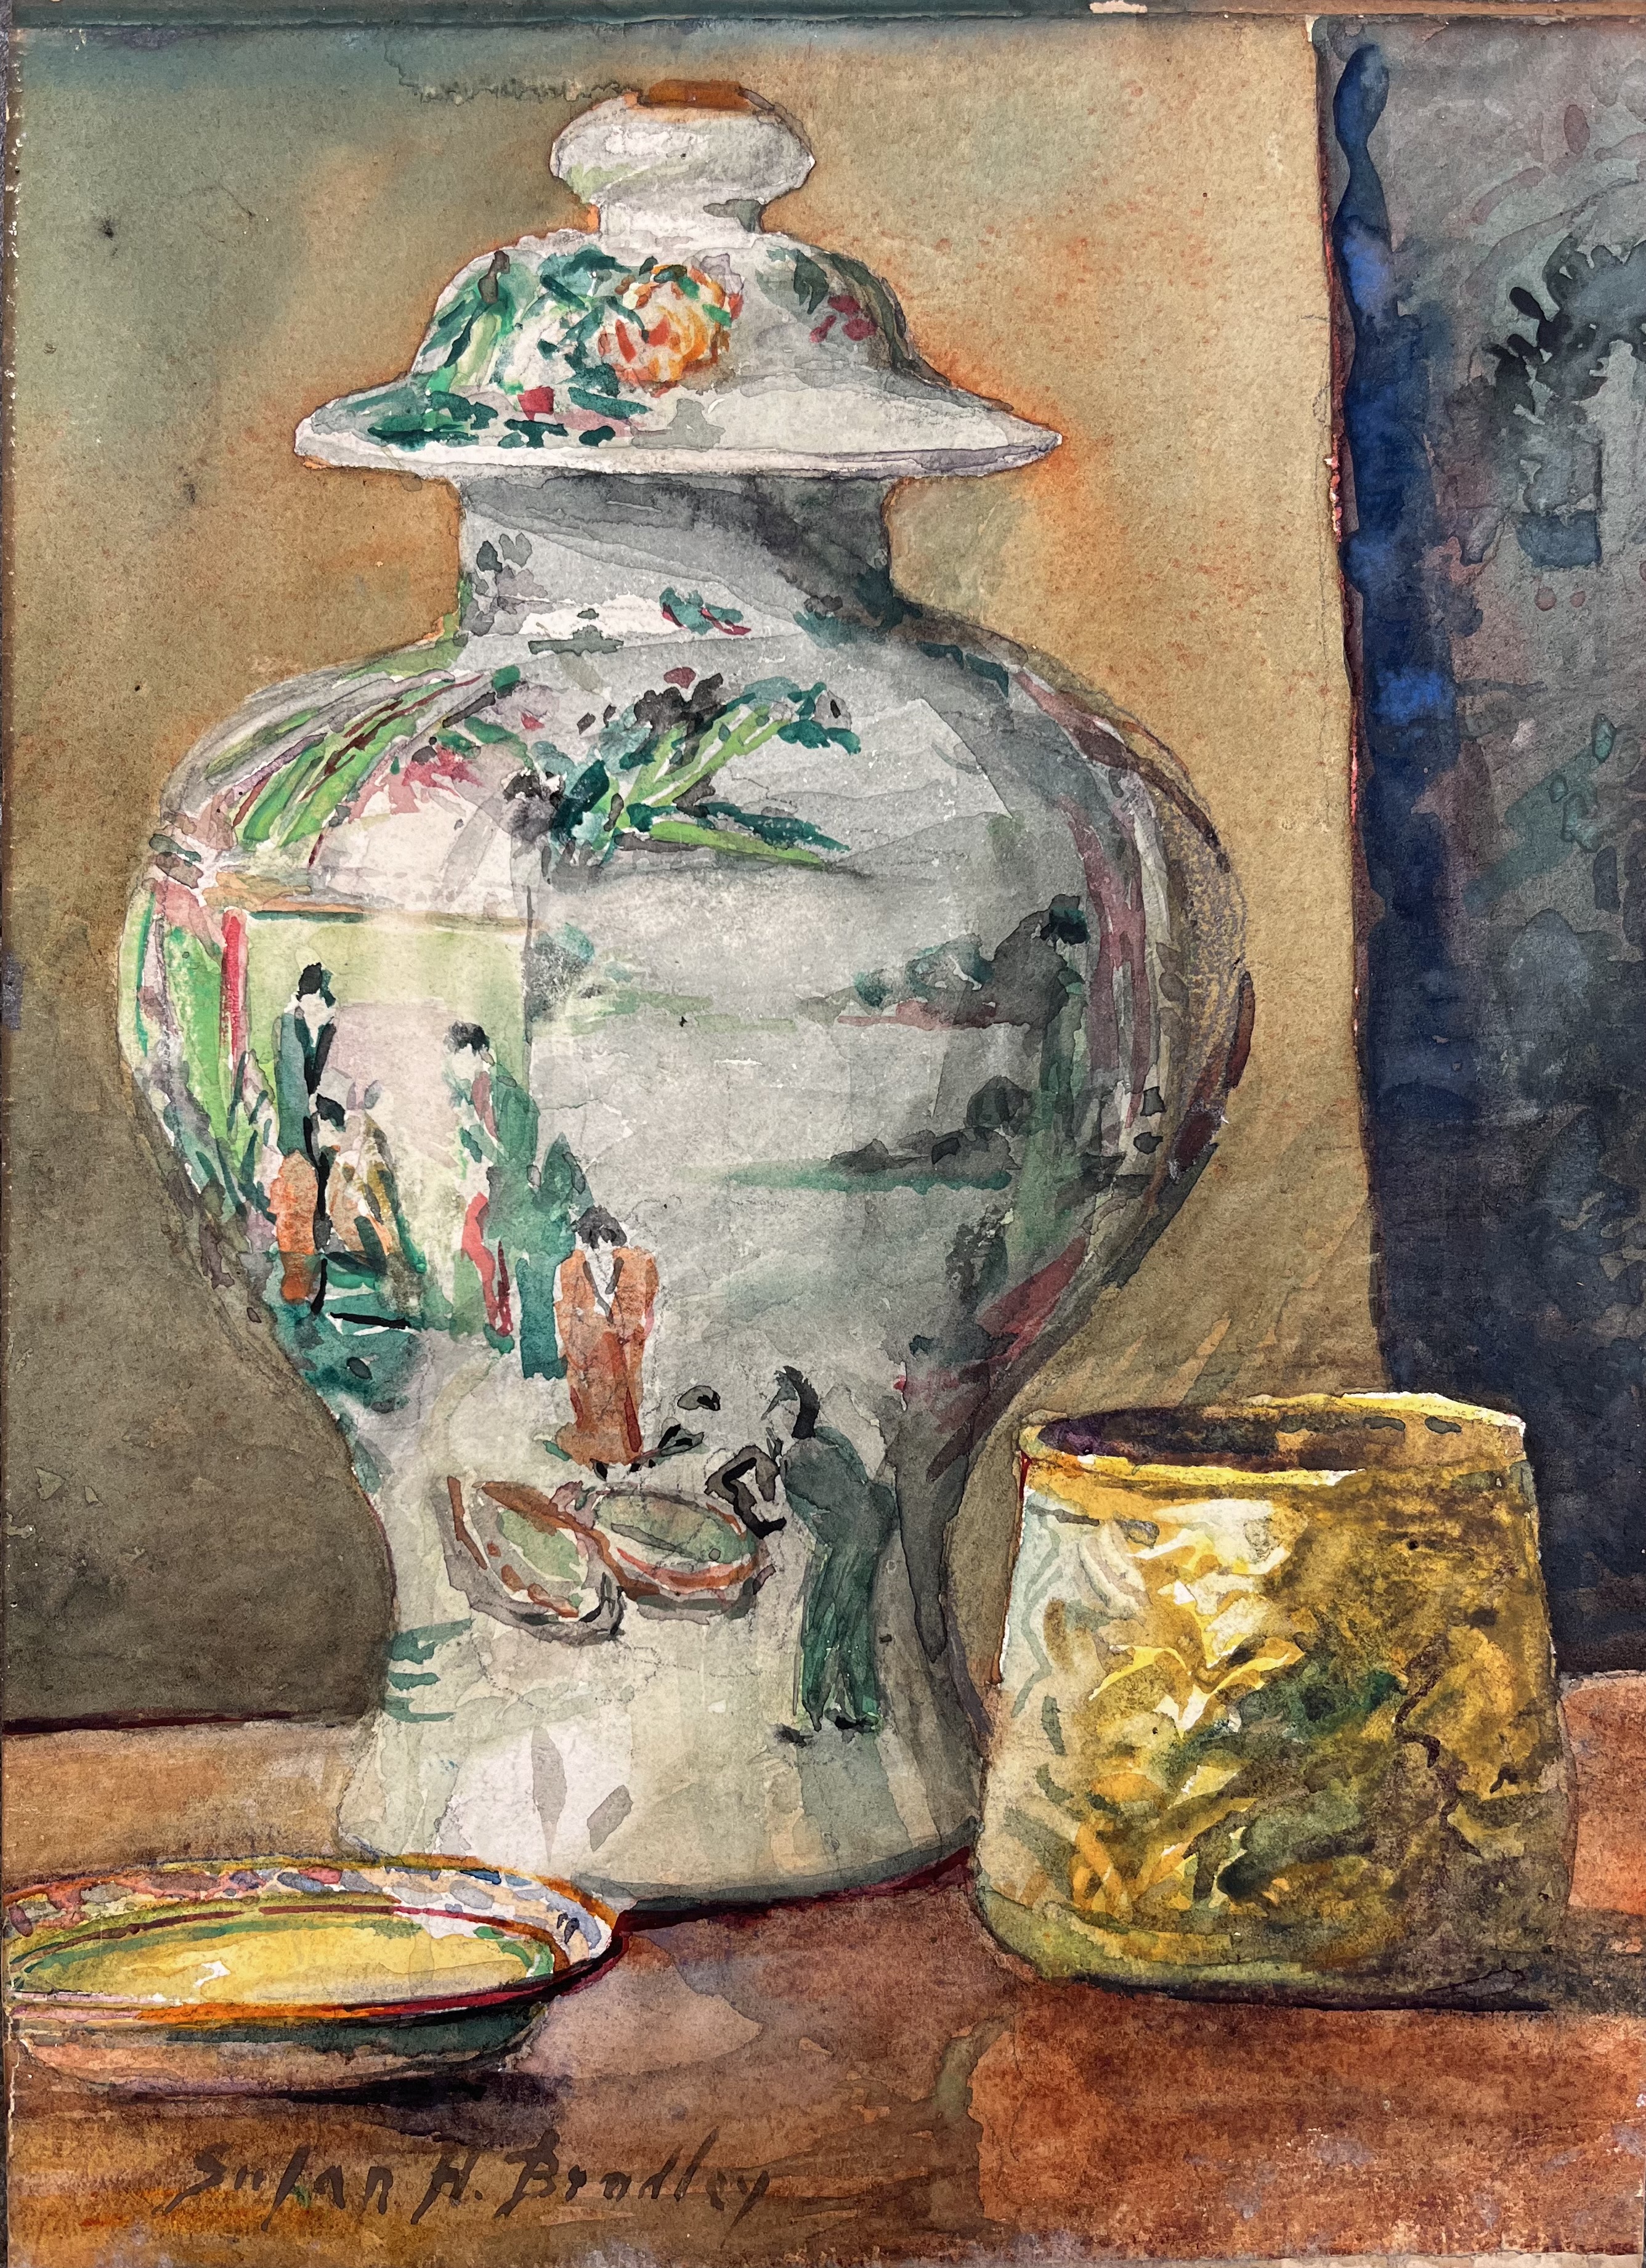 A watercolor painting features a tall vase painted in an Asian motif of people and flowers standing on a table next to smaller gold jar and dish.